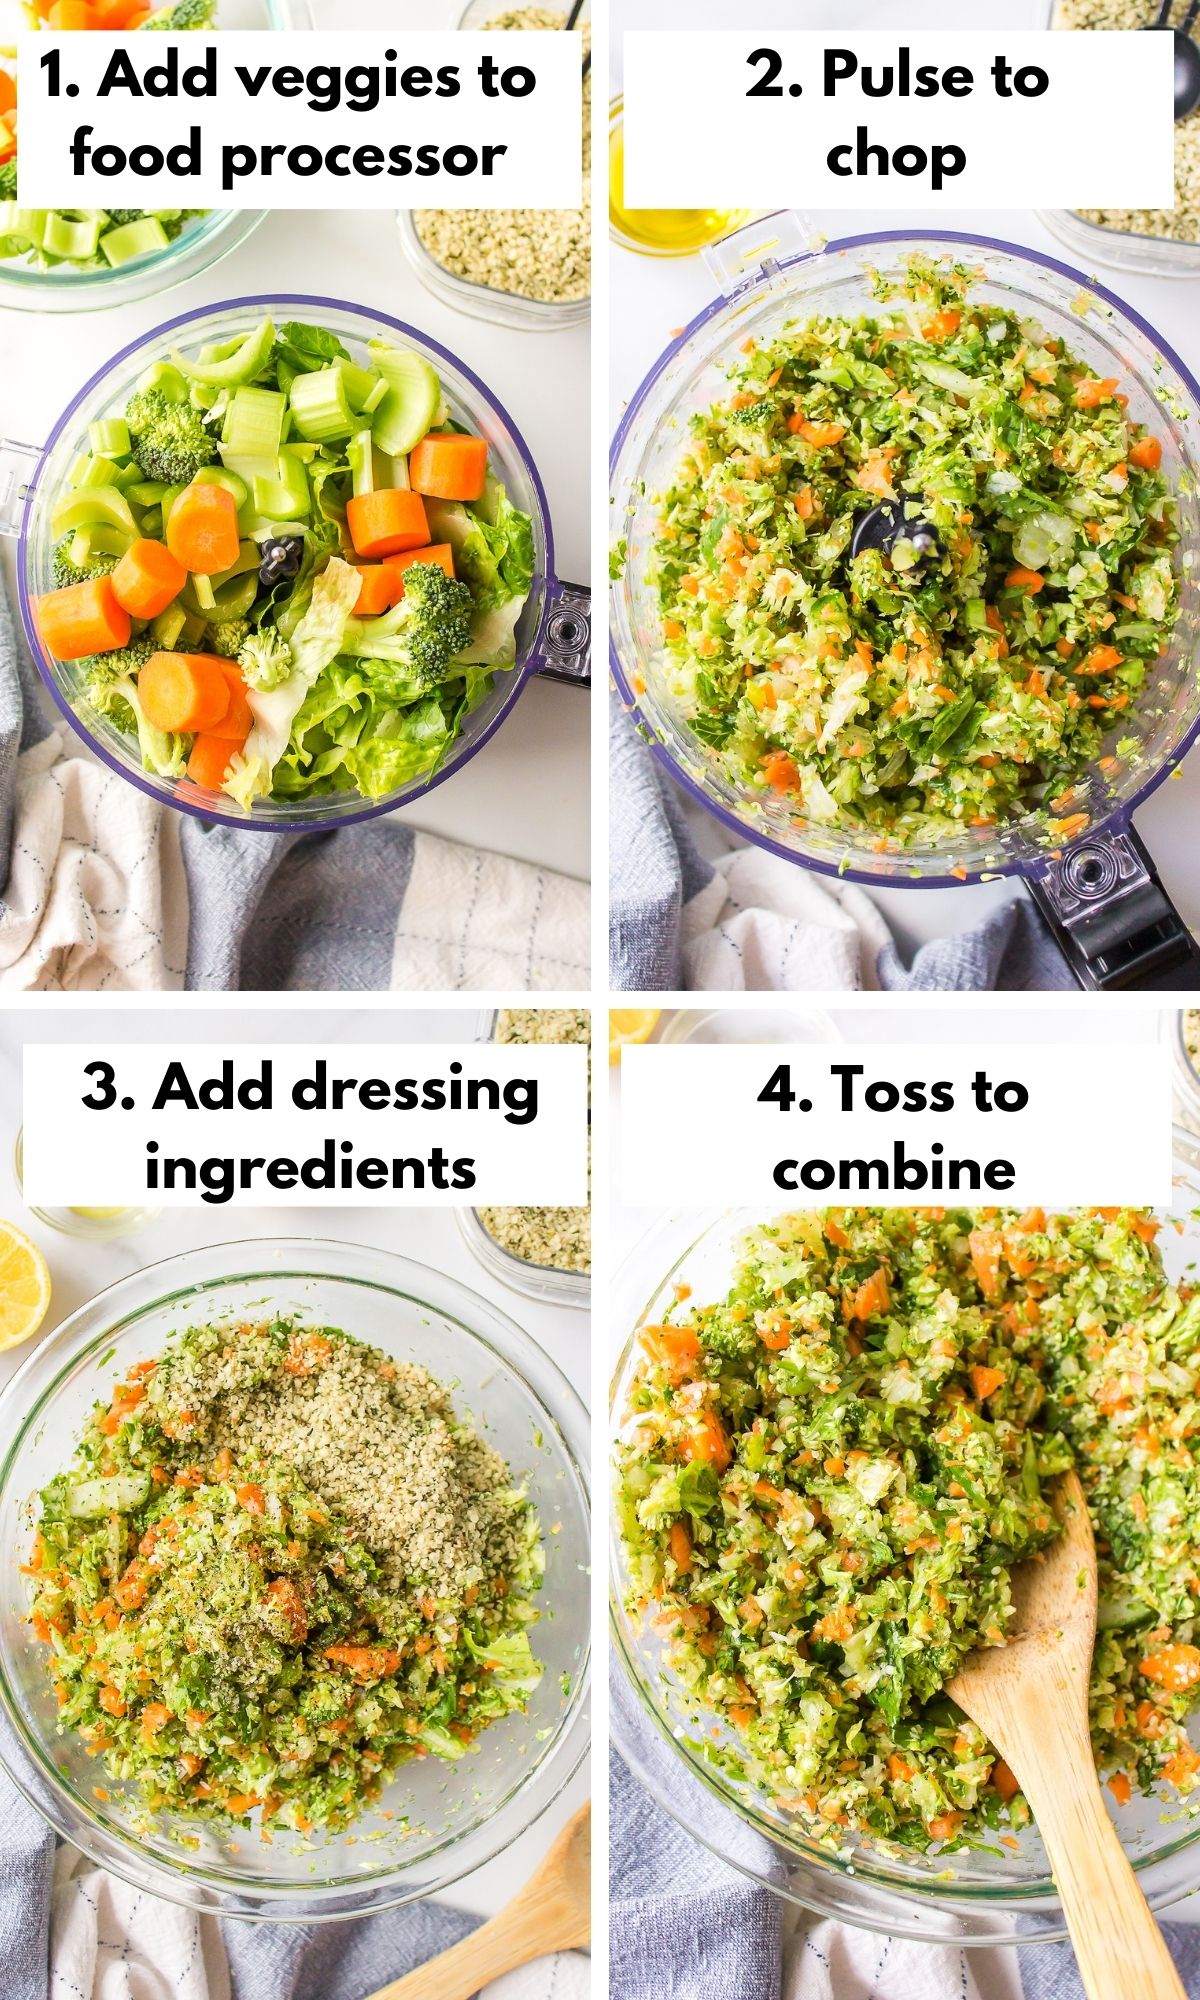 https://www.cleaneatingkitchen.com/wp-content/uploads/2022/06/Chopped-Salad-Process-Collage.jpg